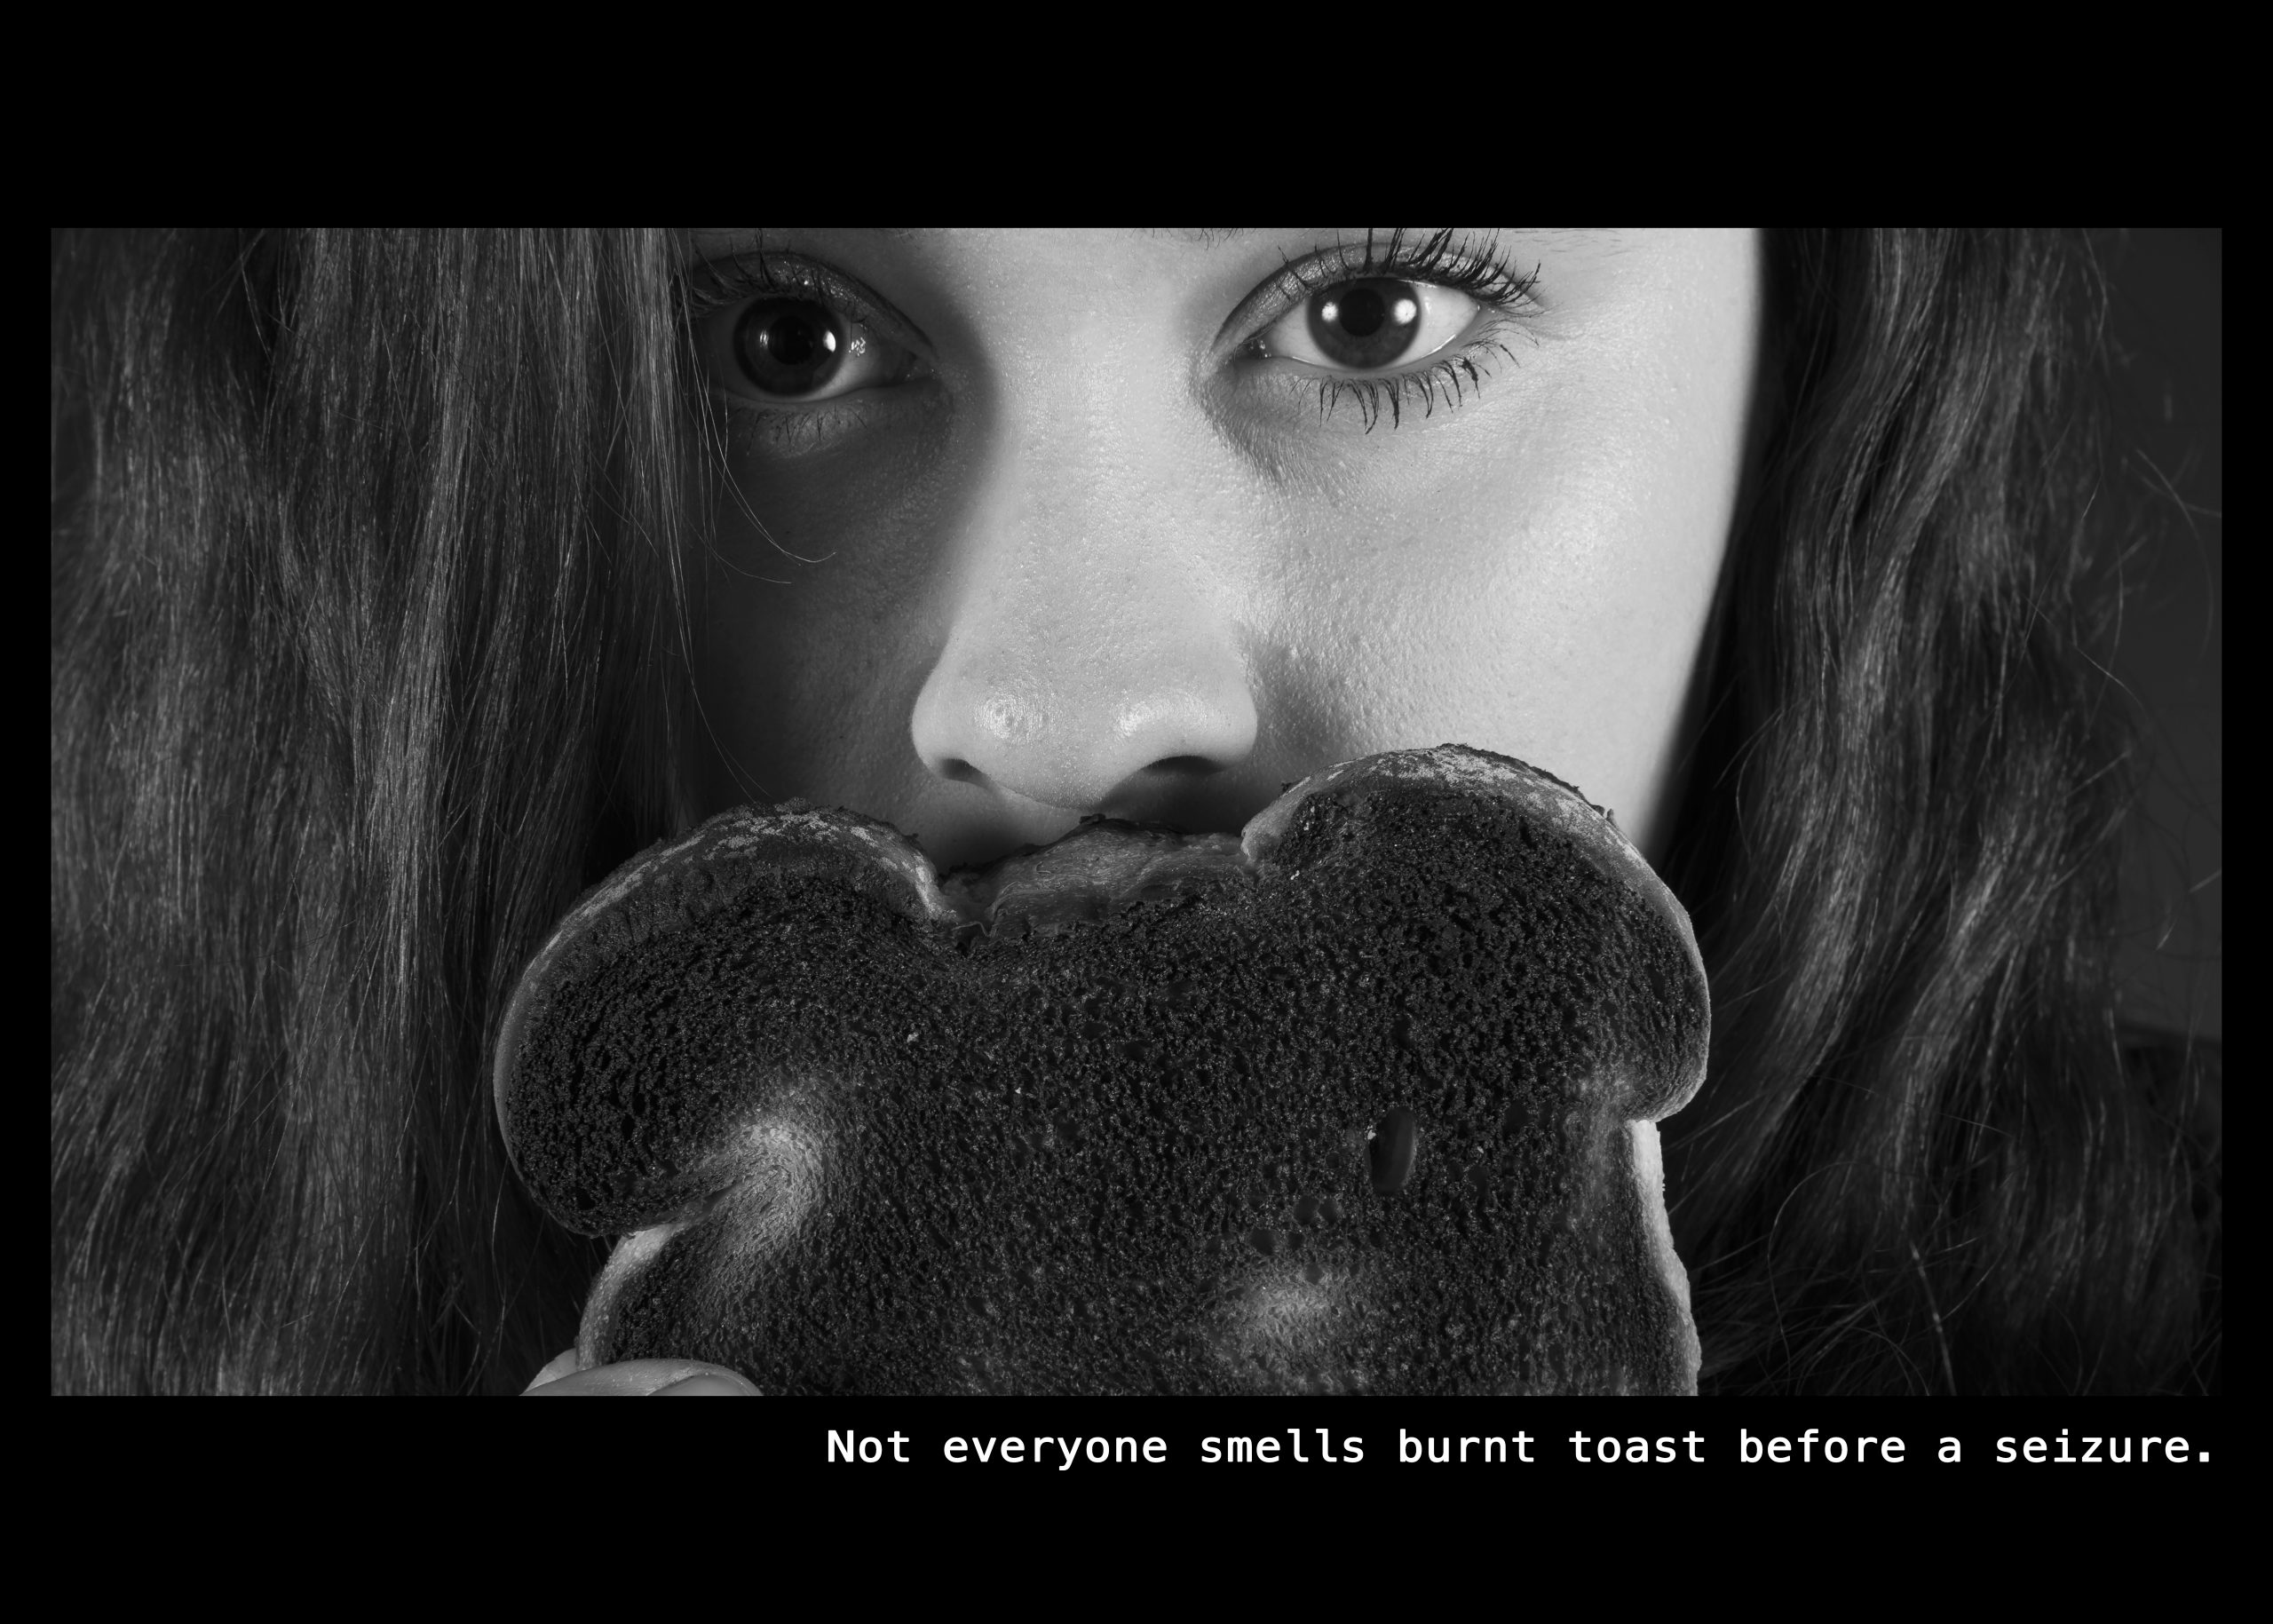 Image of a woman with a piece of burnt toast covering the lower half of her face. Text: Not everyone smells burnt toast before a seizure.